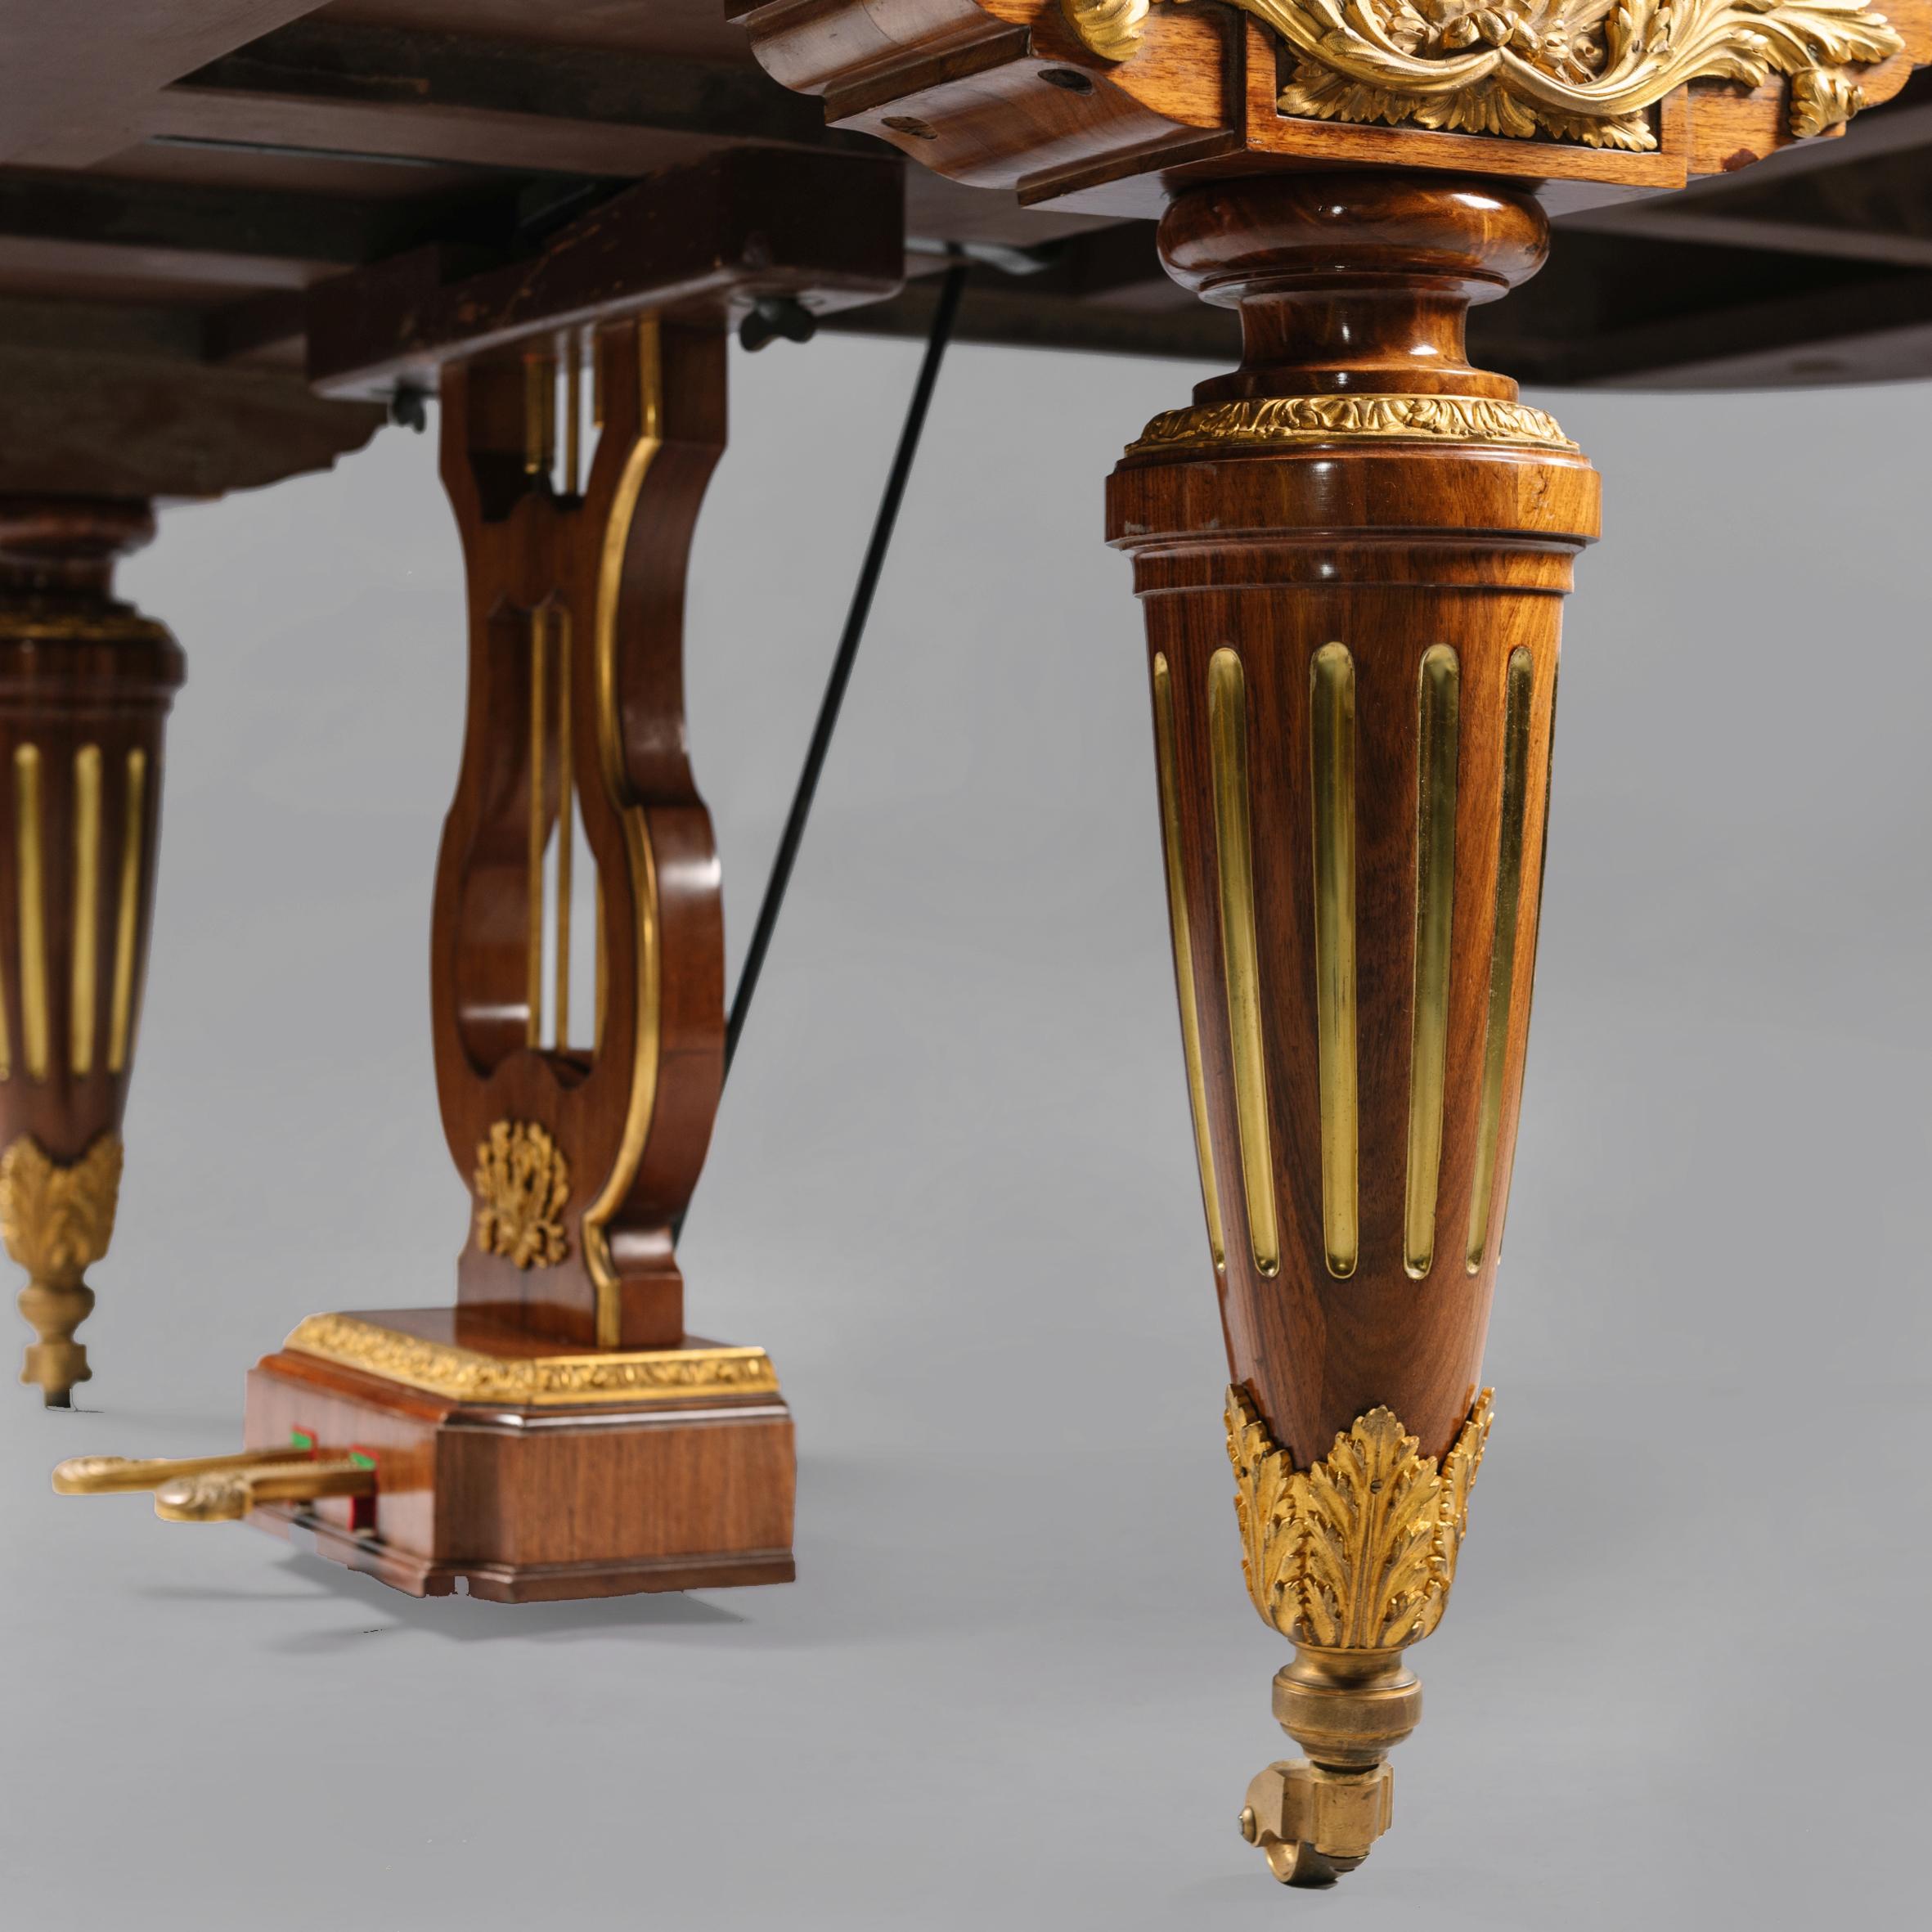 Louis XVI Style GBaby Grand Piano by Gaveau à Paris For Sale 5